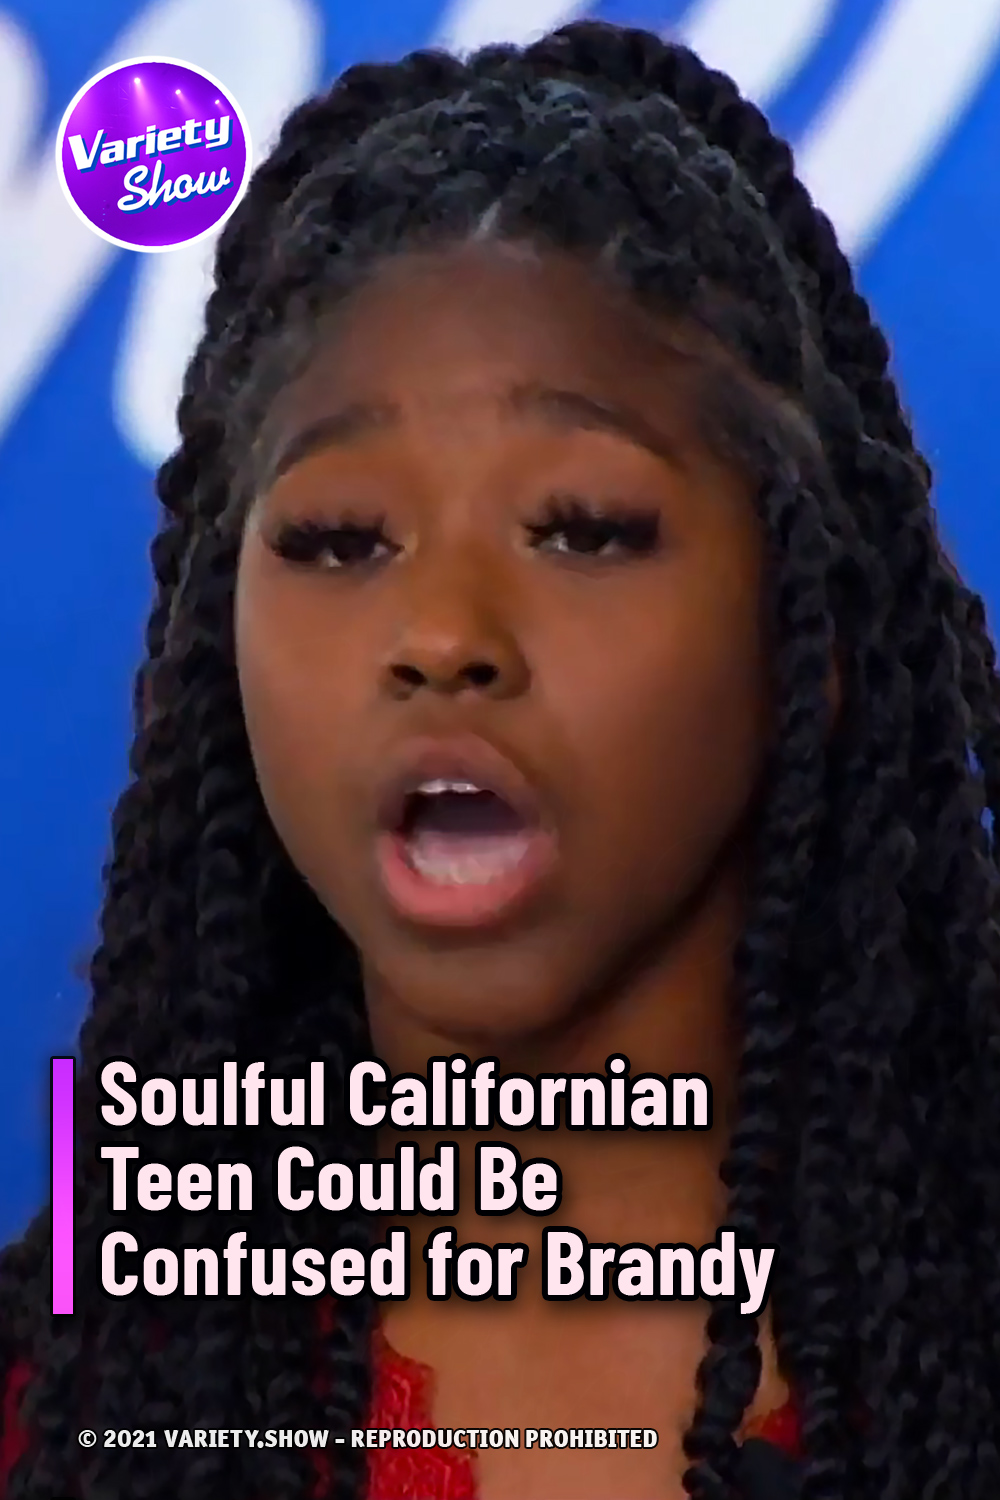 Soulful Californian Teen Could Be Confused for Brandy